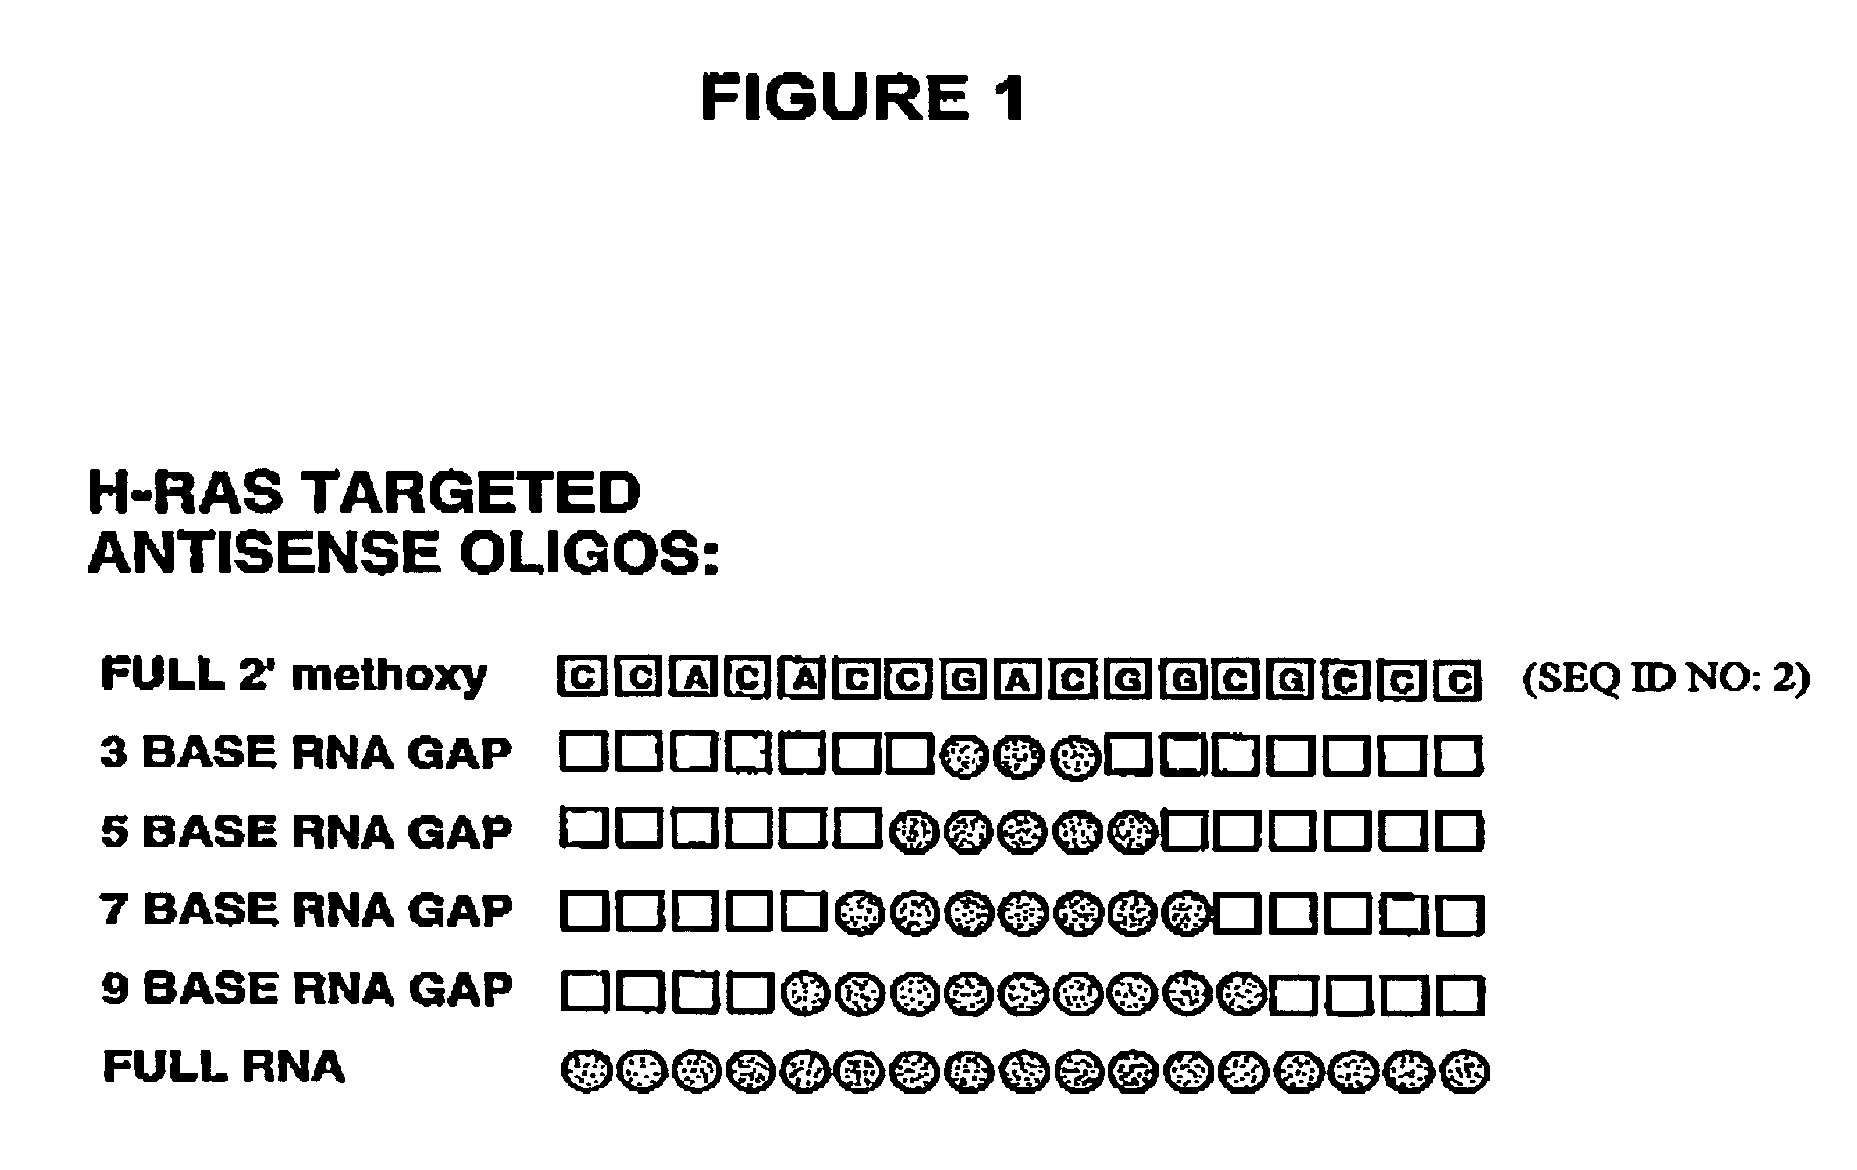 Oligoribonucleotides and ribonucleases for cleaving RNA